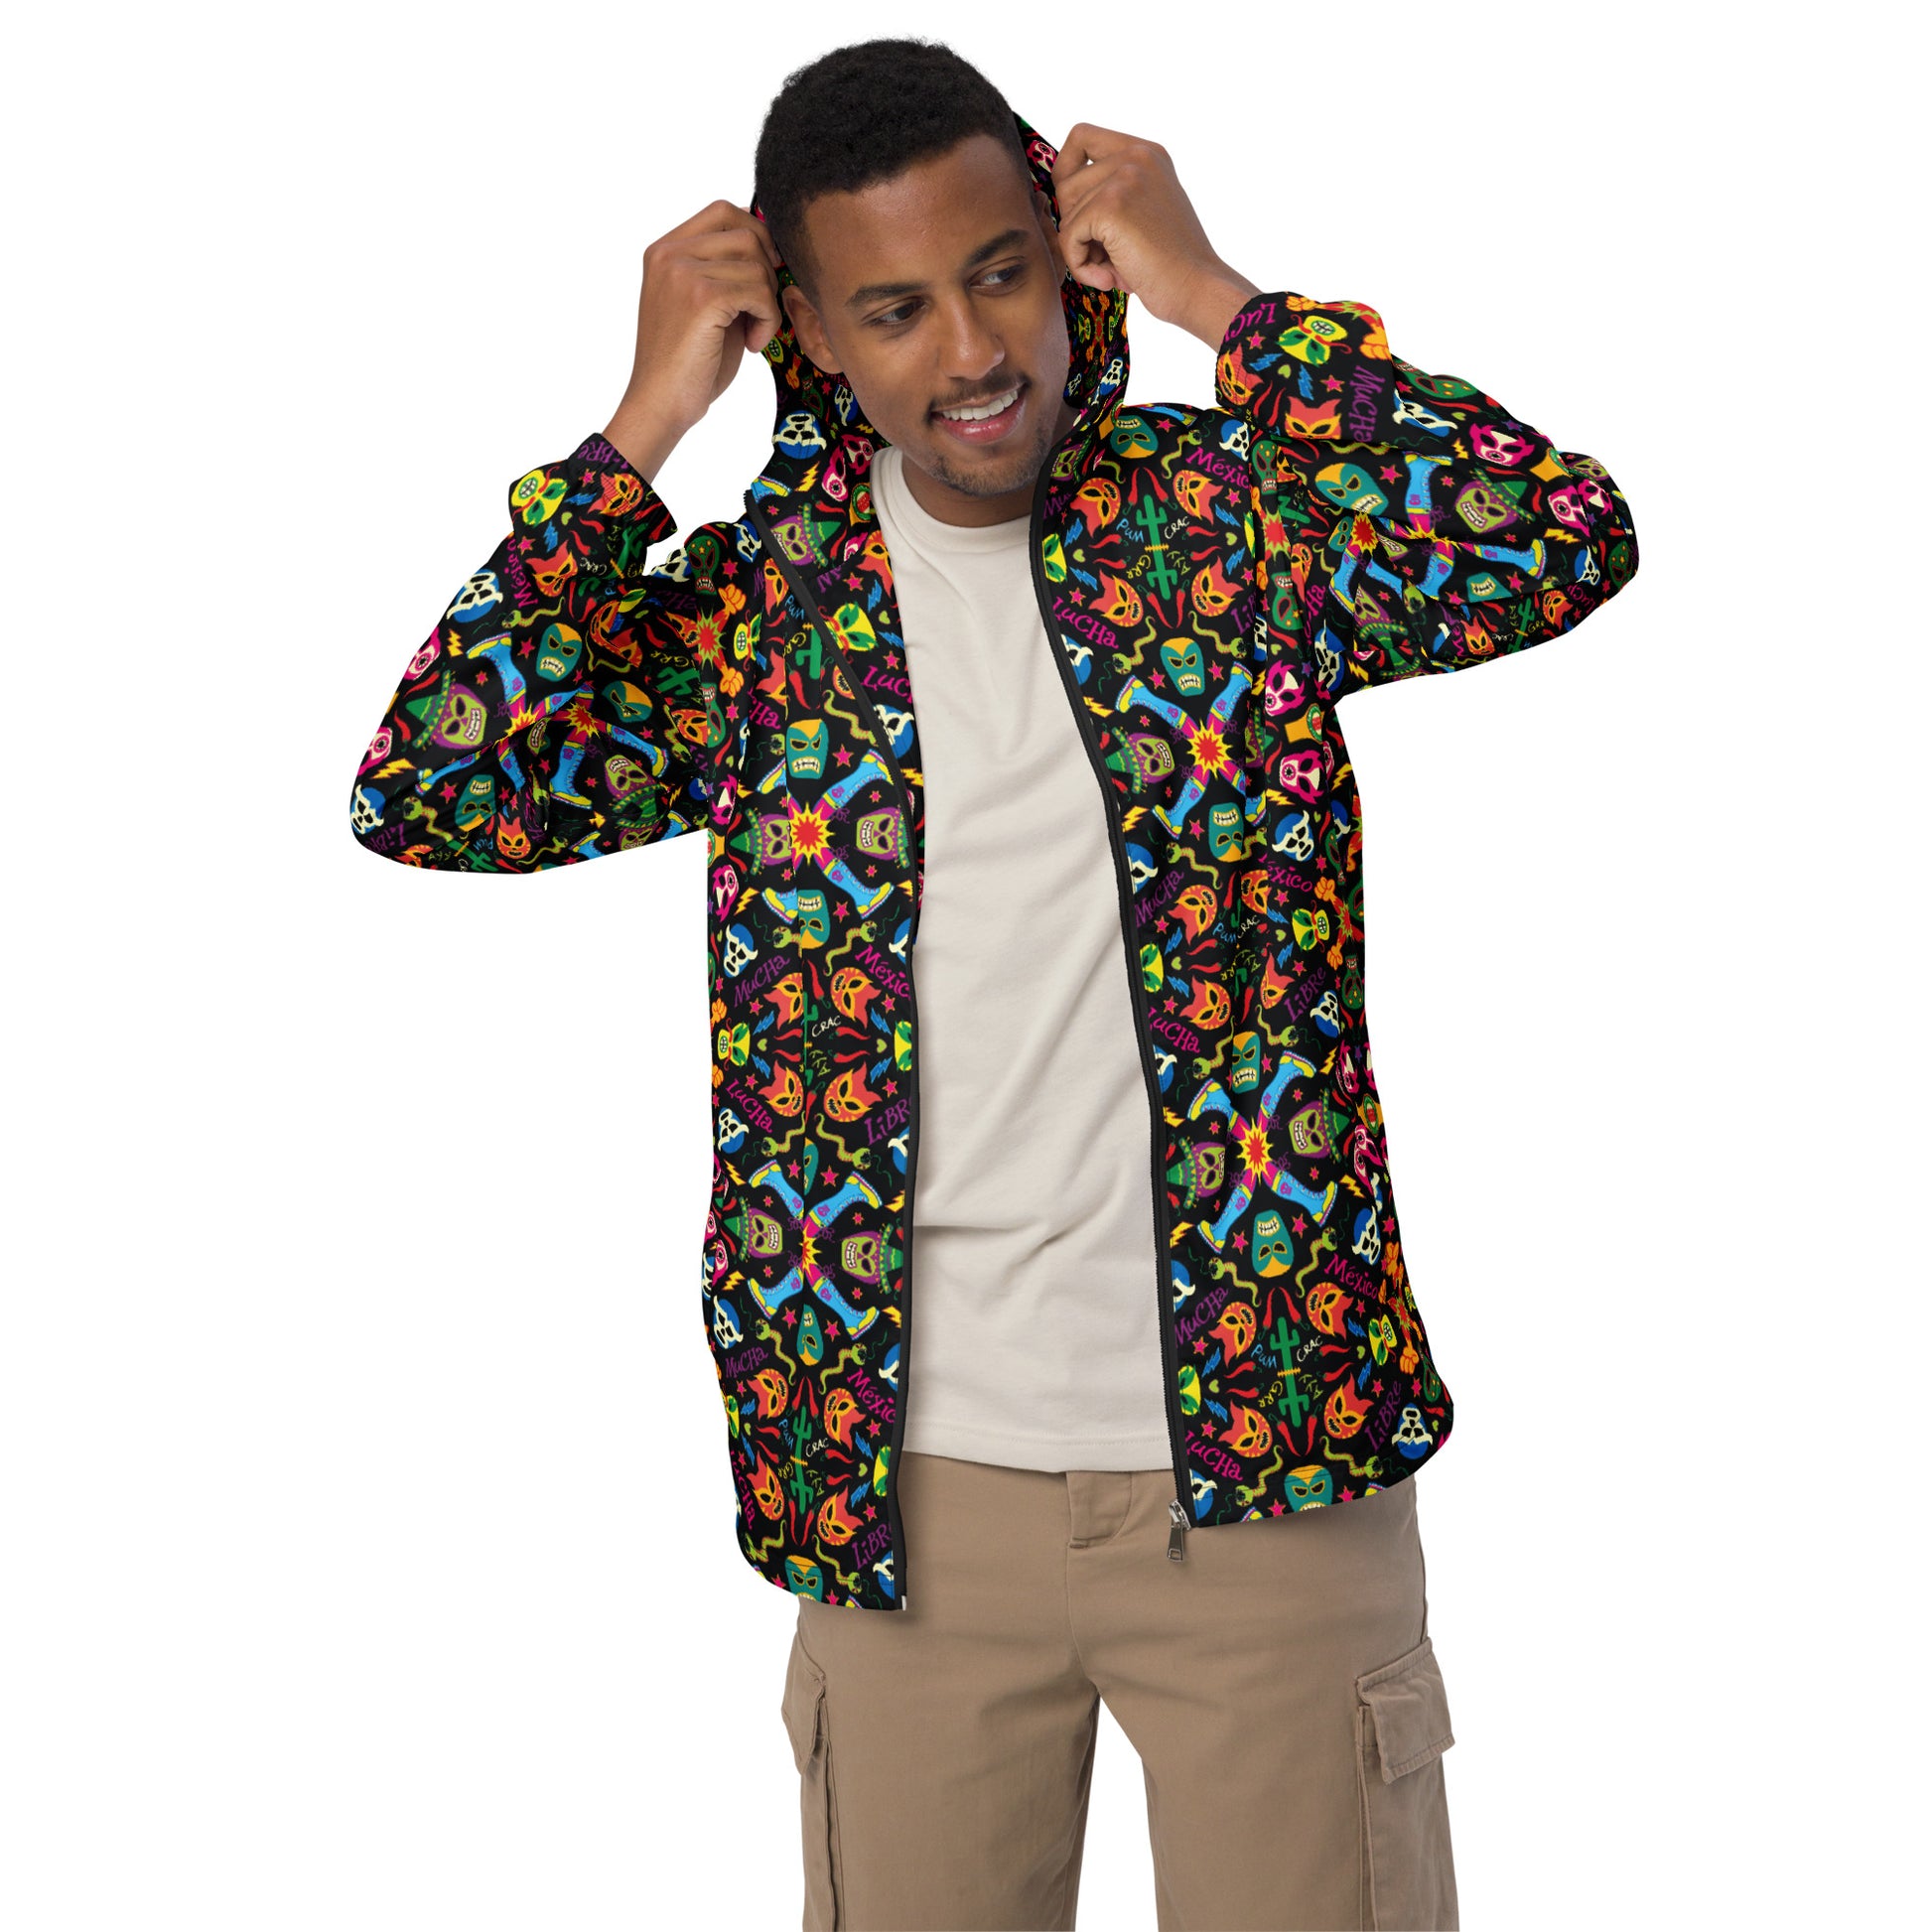 Mexican wrestling colorful party Men’s windbreaker. Front view